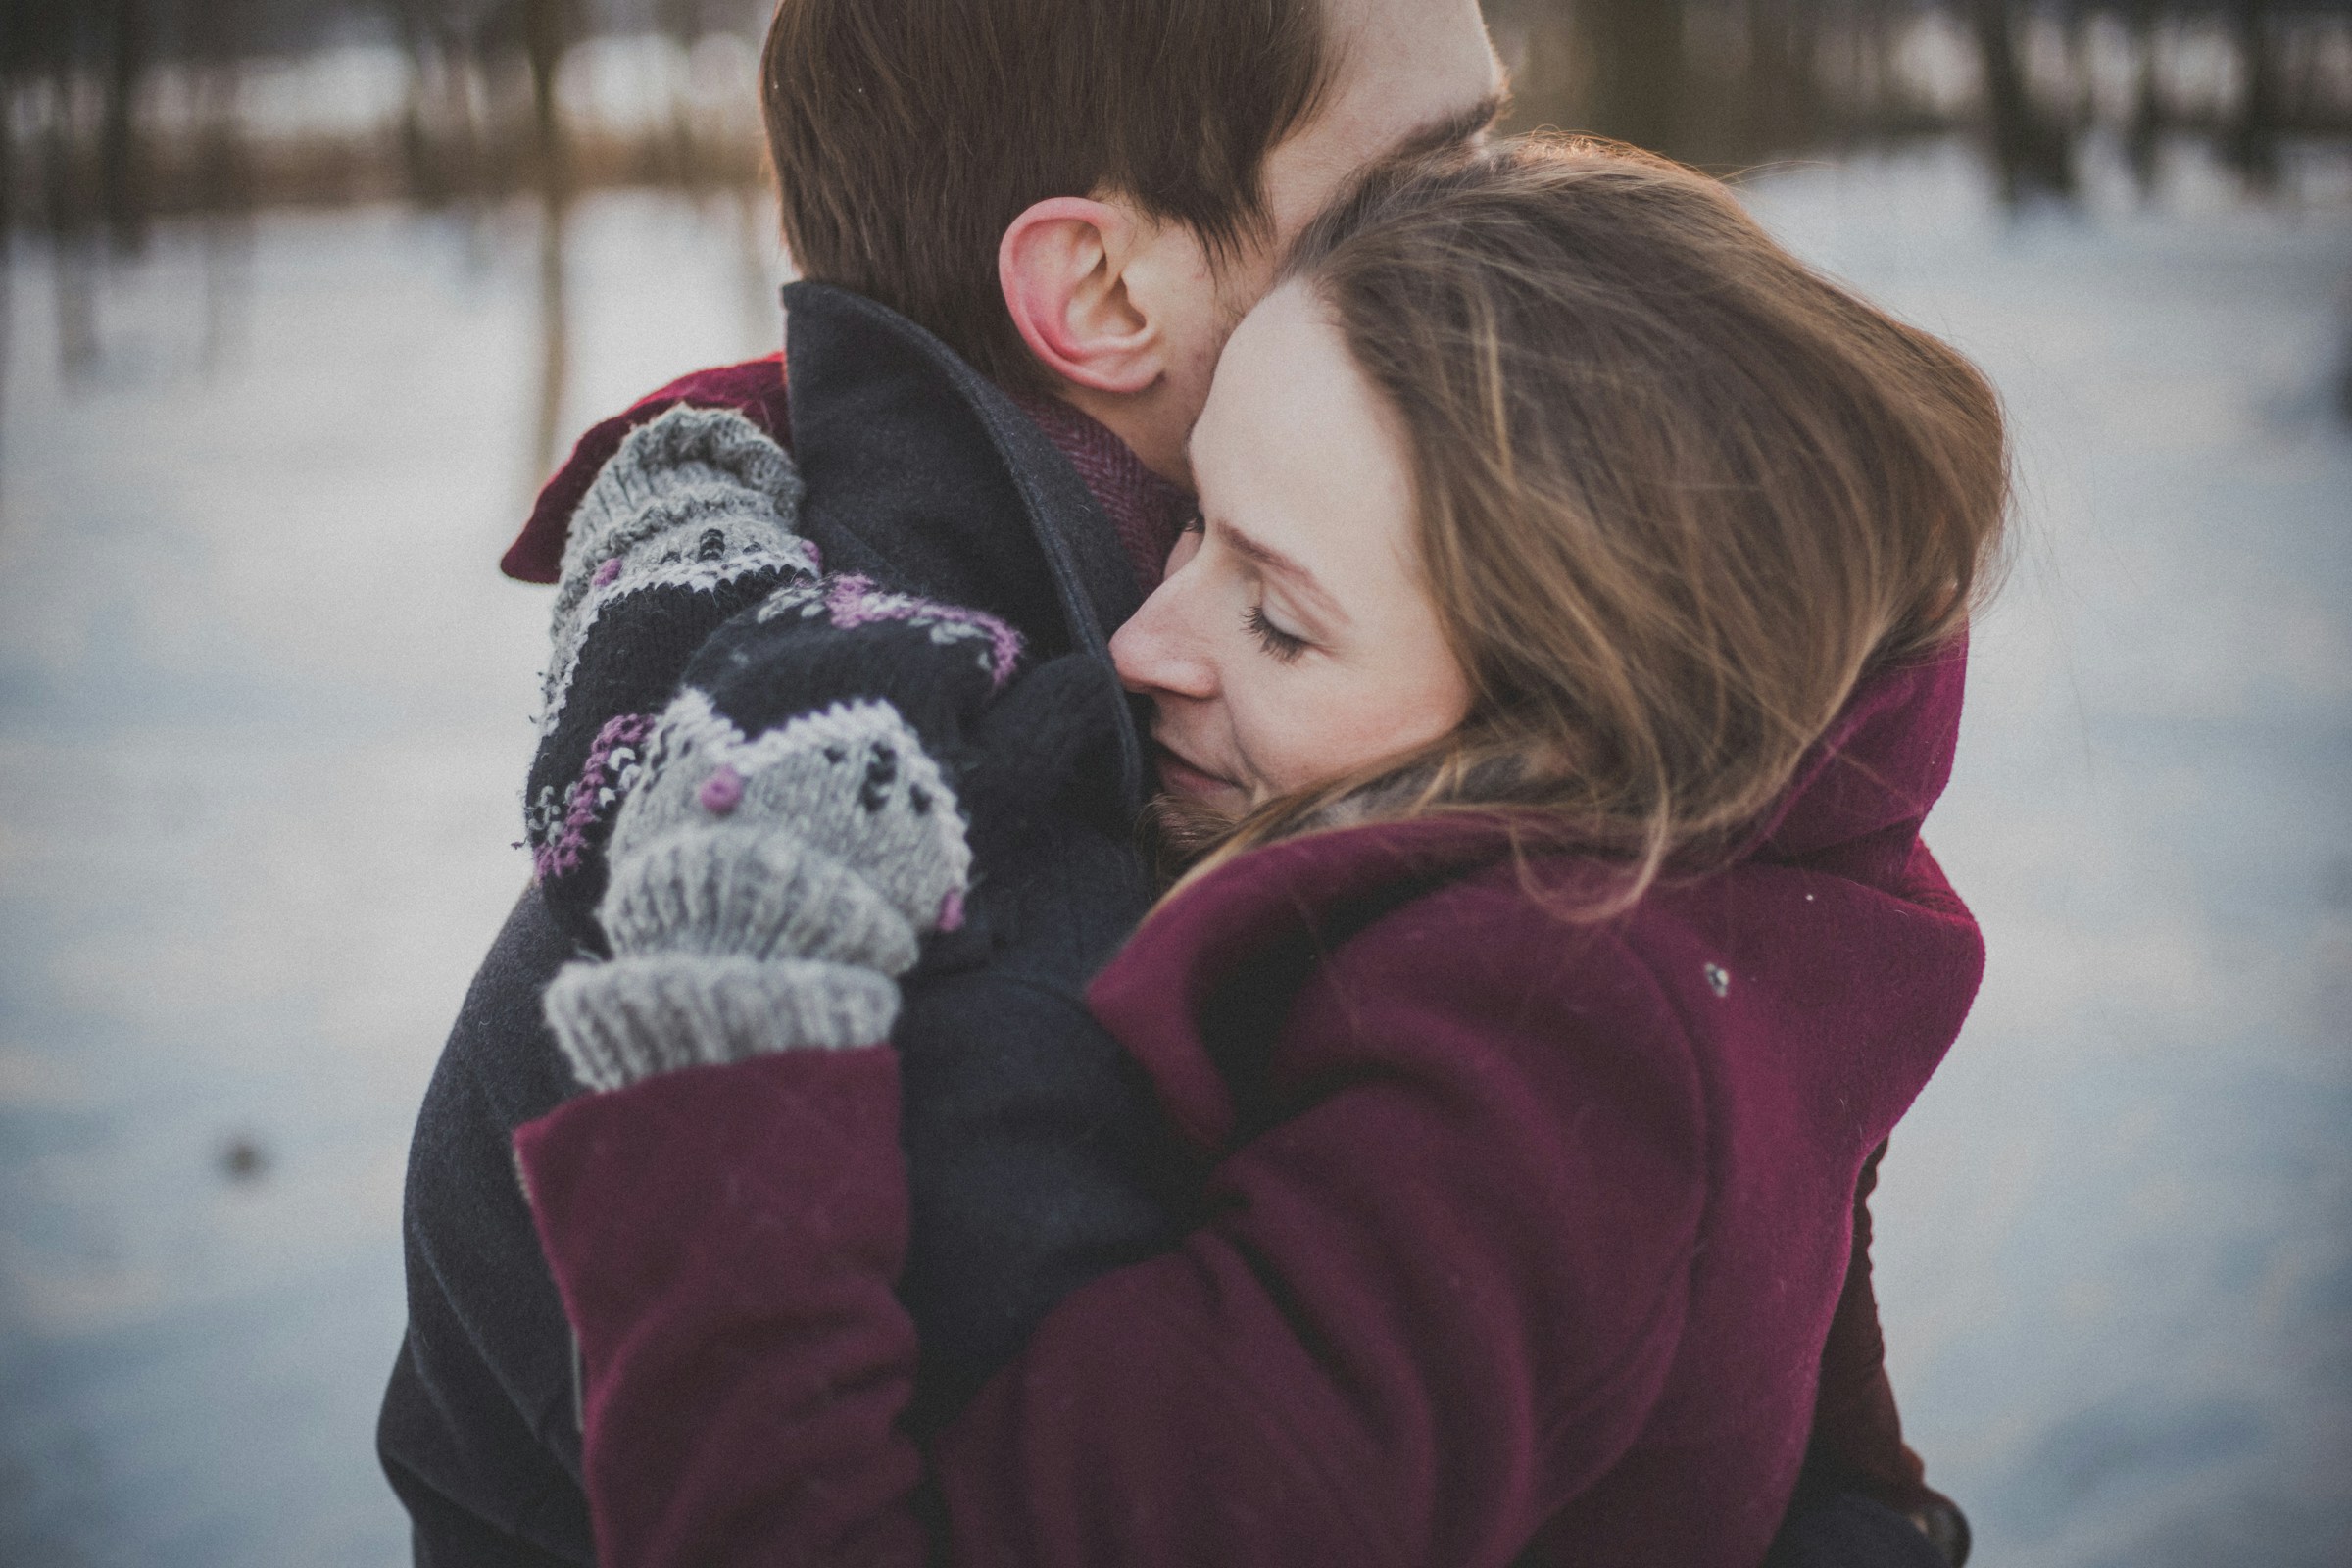 A couple hugging in winter | Source: Unsplash